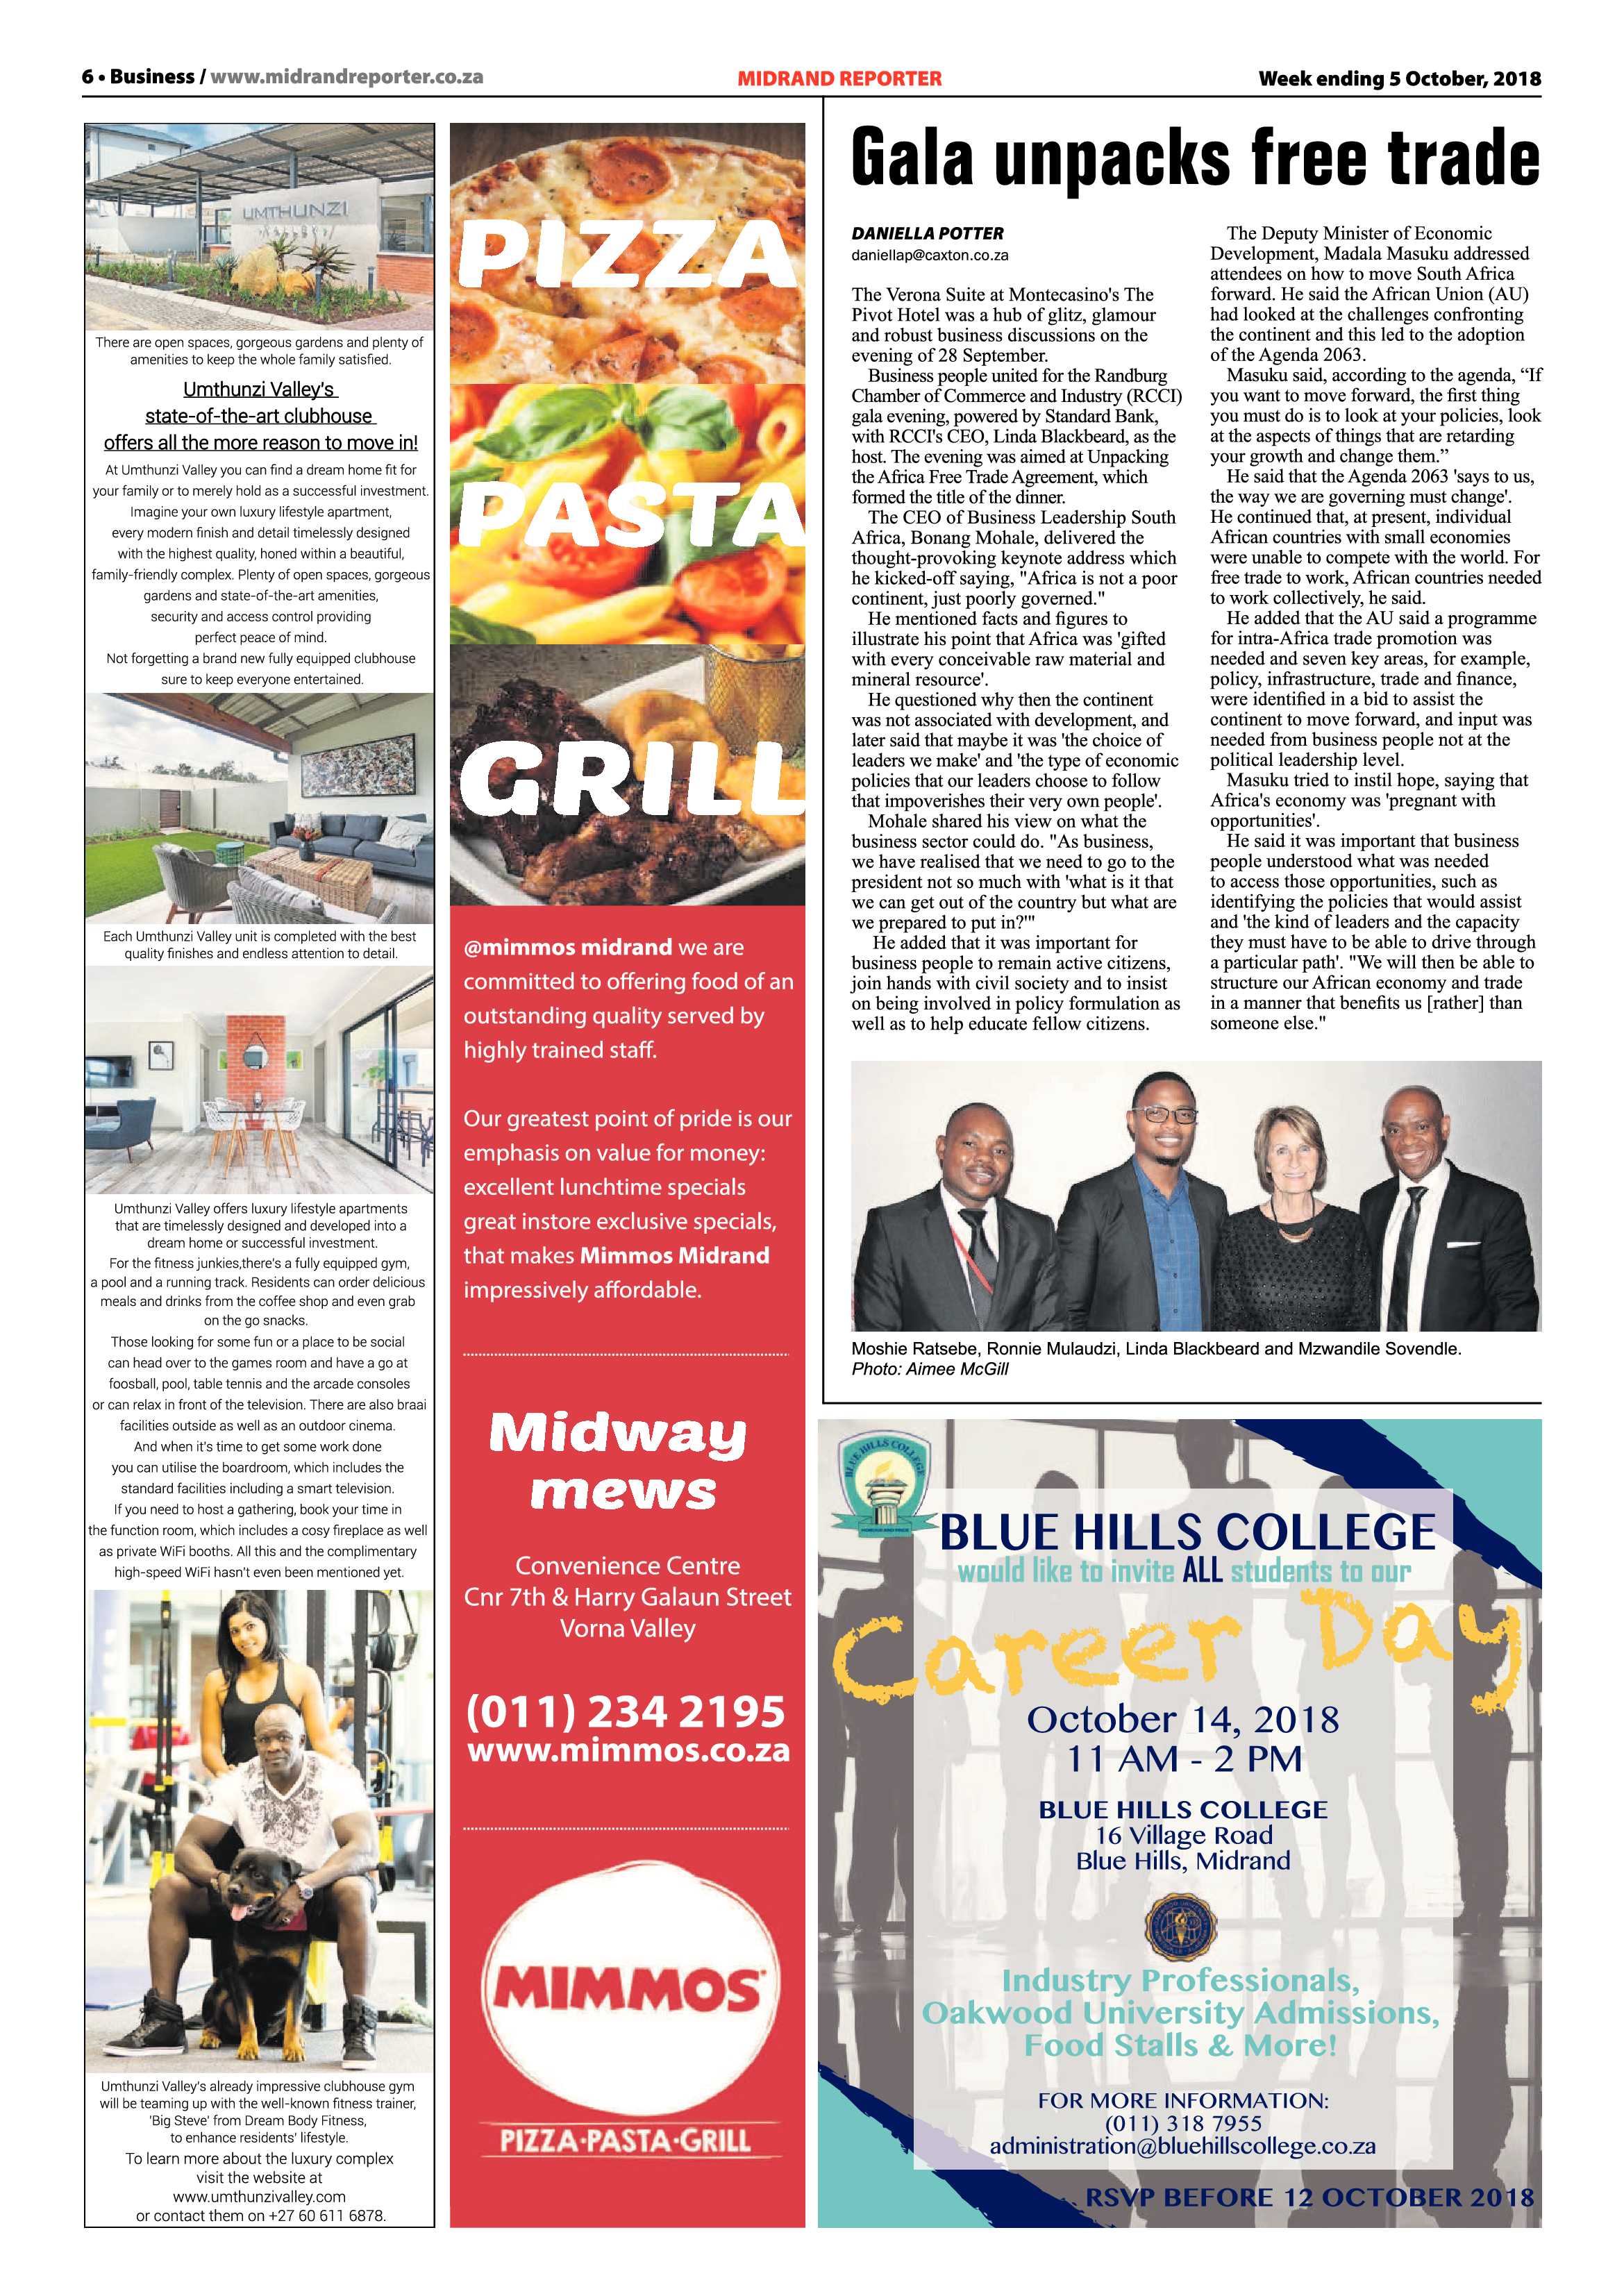 Midrand Reporter 5 October, 2018 page 6